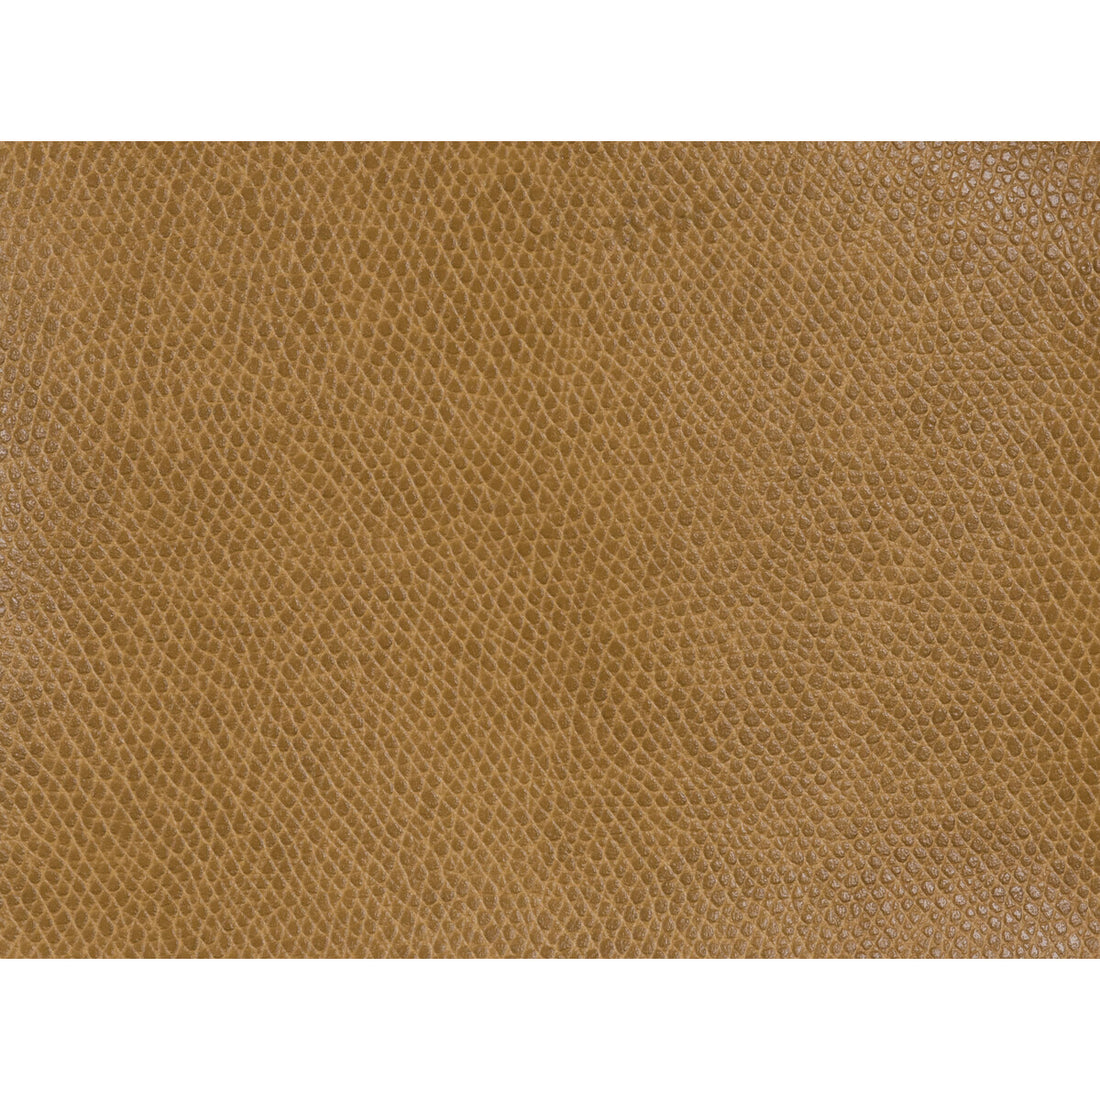 Ophidian fabric in cognac color - pattern OPHIDIAN.124.0 - by Kravet Contract in the Sta-Kleen collection